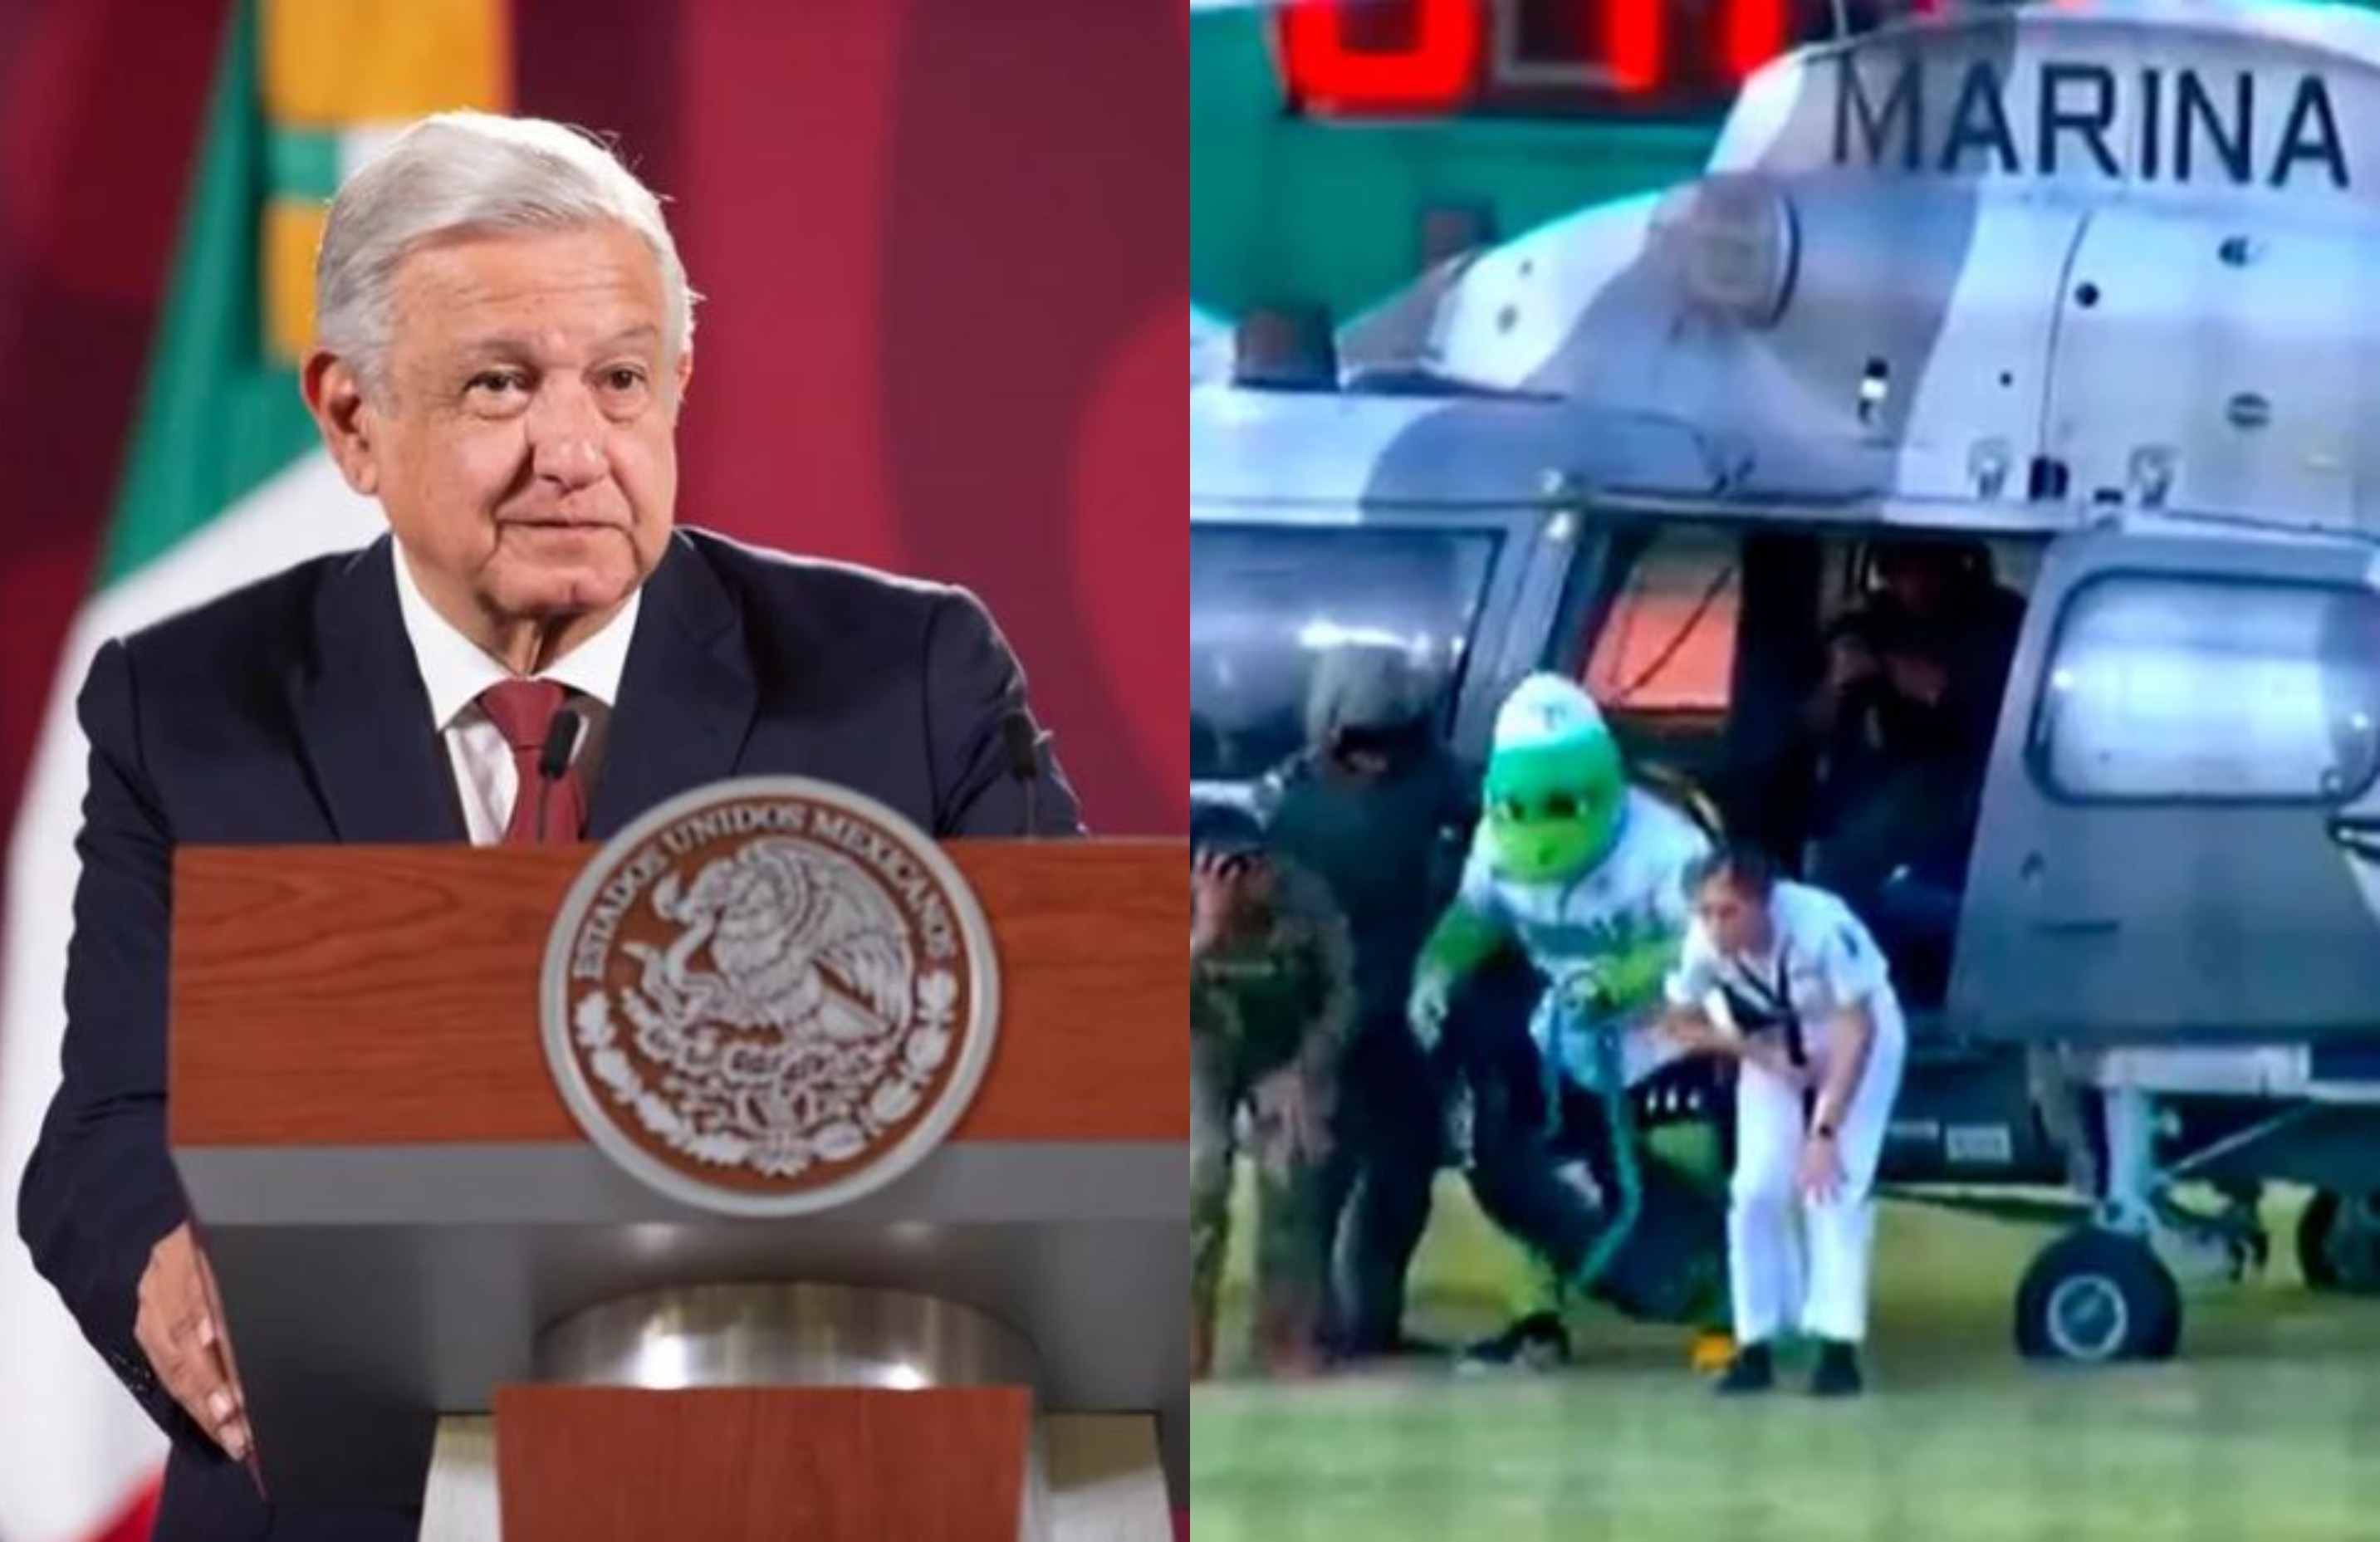 AMLO reacted to the improper use of a Navy helicopter for a baseball game in his homeland Photo: Presidency/@LMB (Mexican Baseball League)